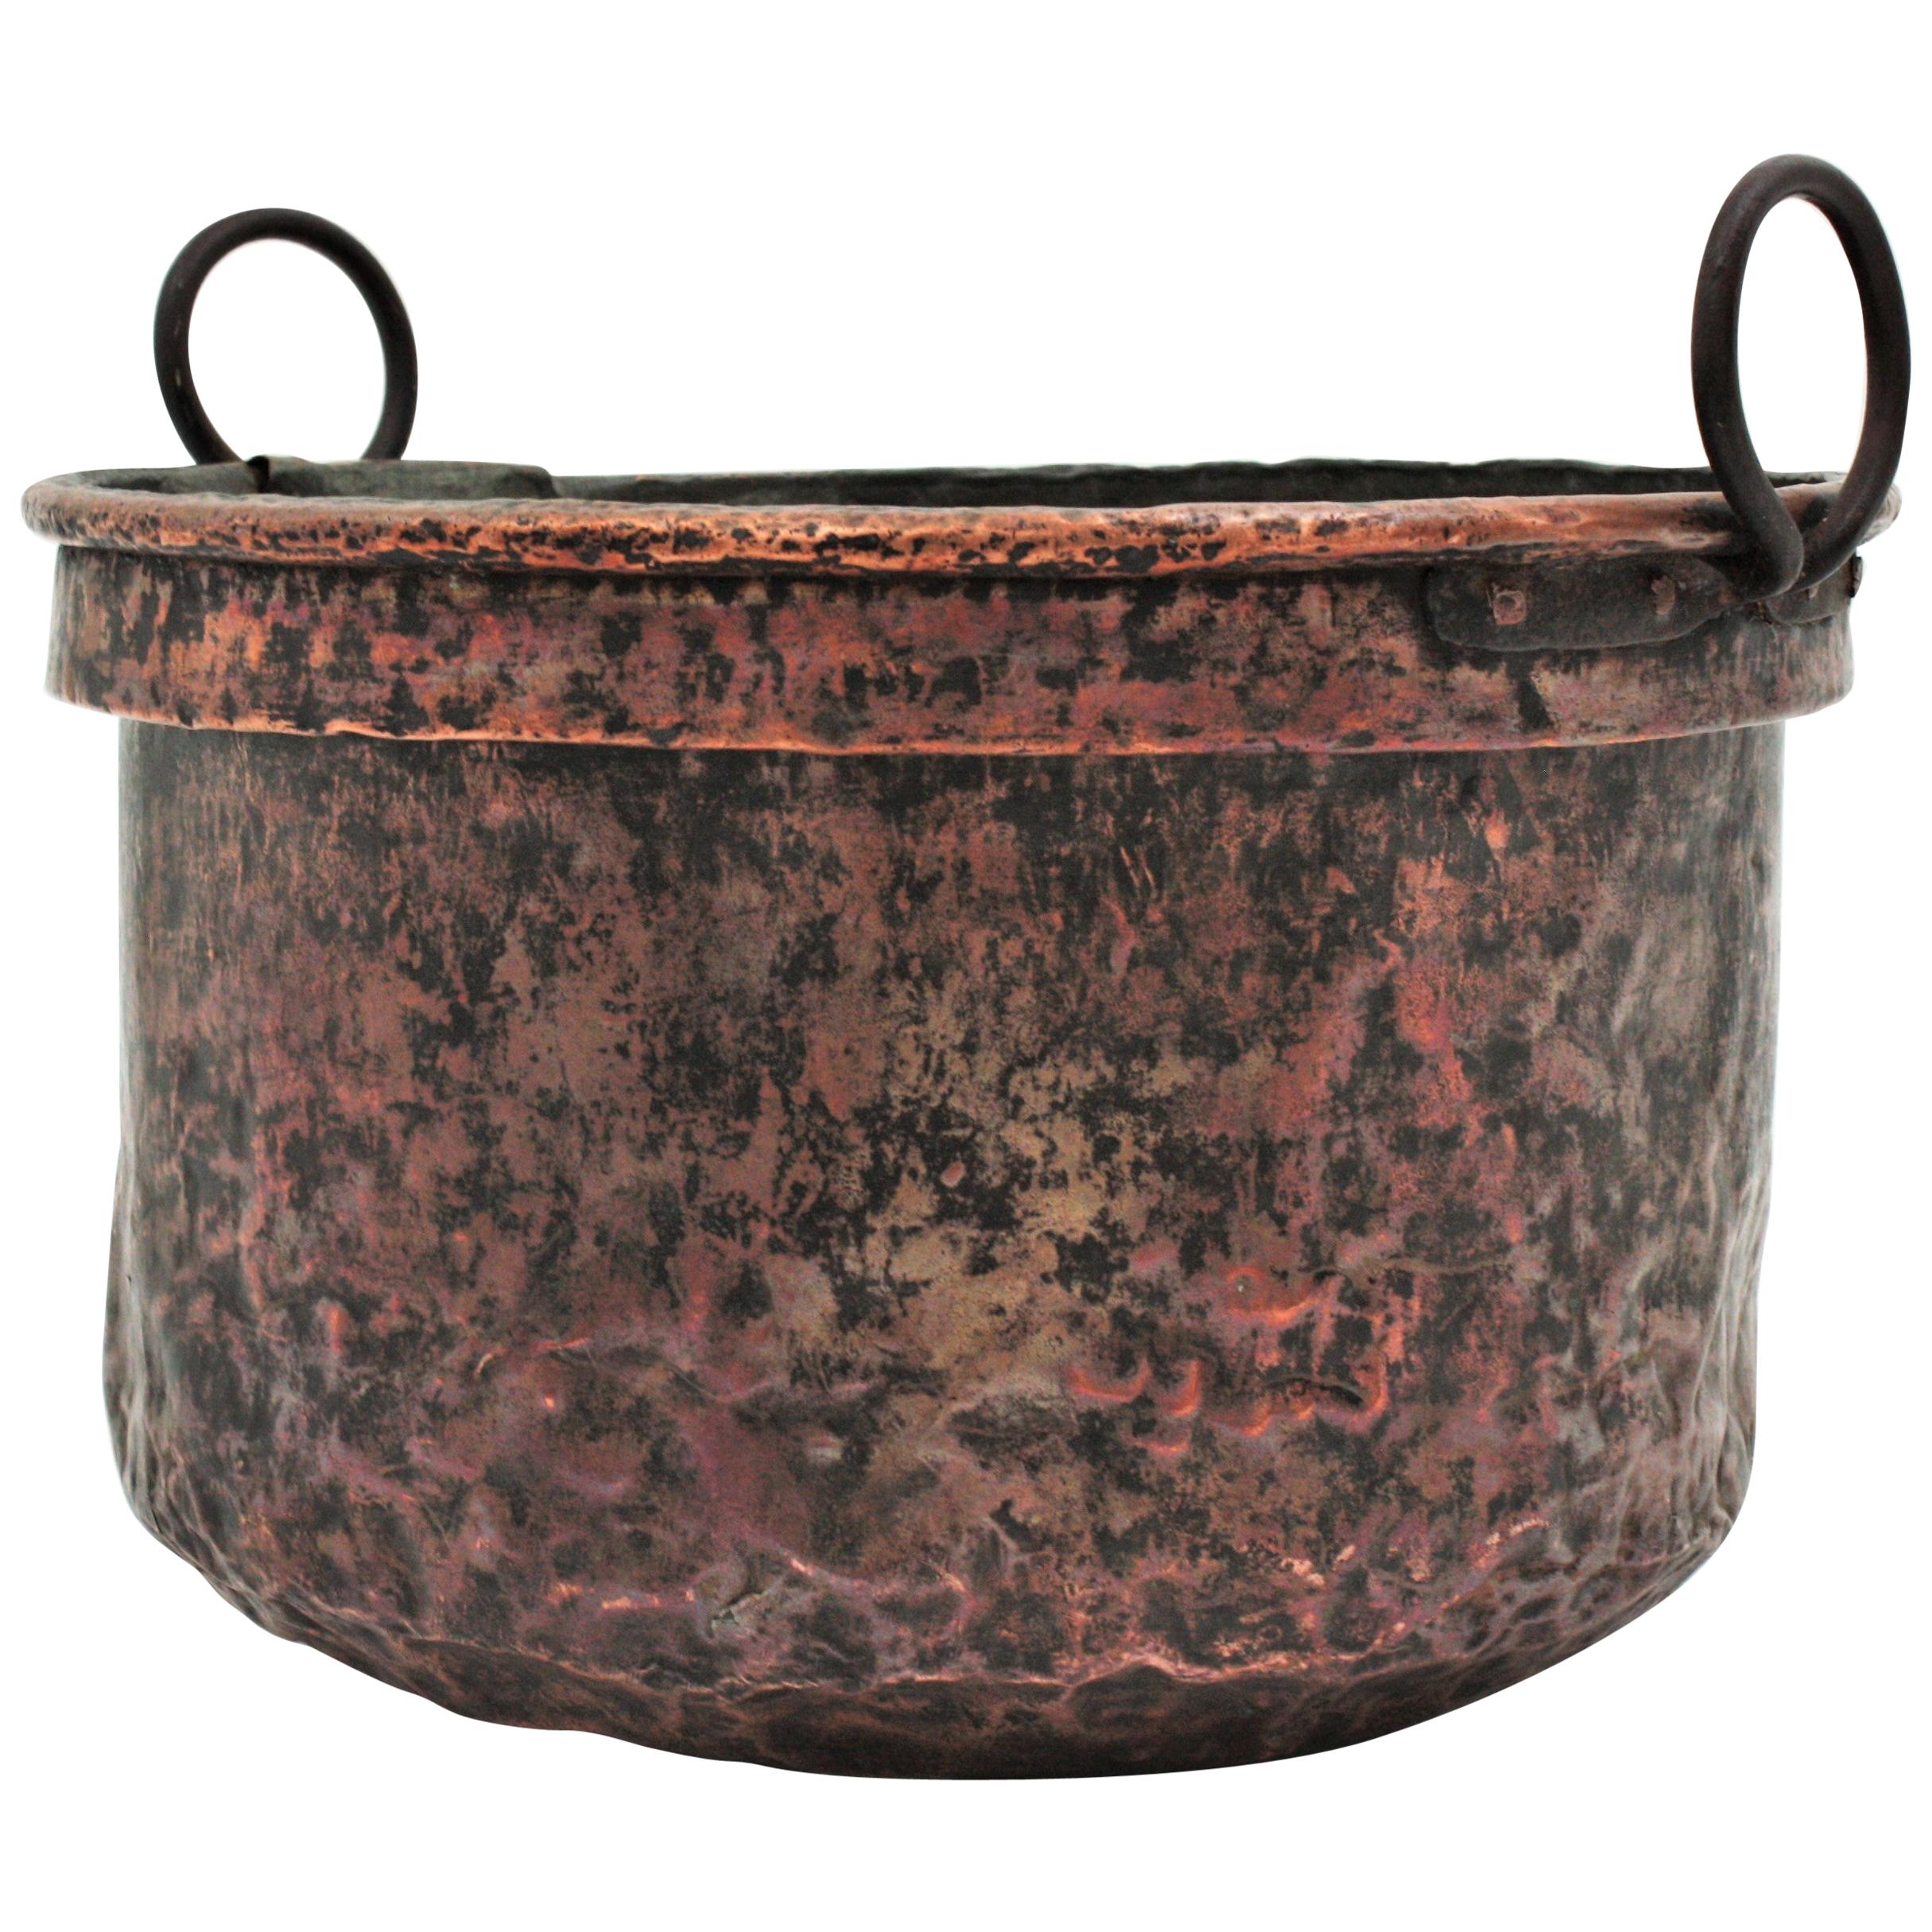 Massive 19th Century French Copper Cauldron with Handles and Terrific Patina